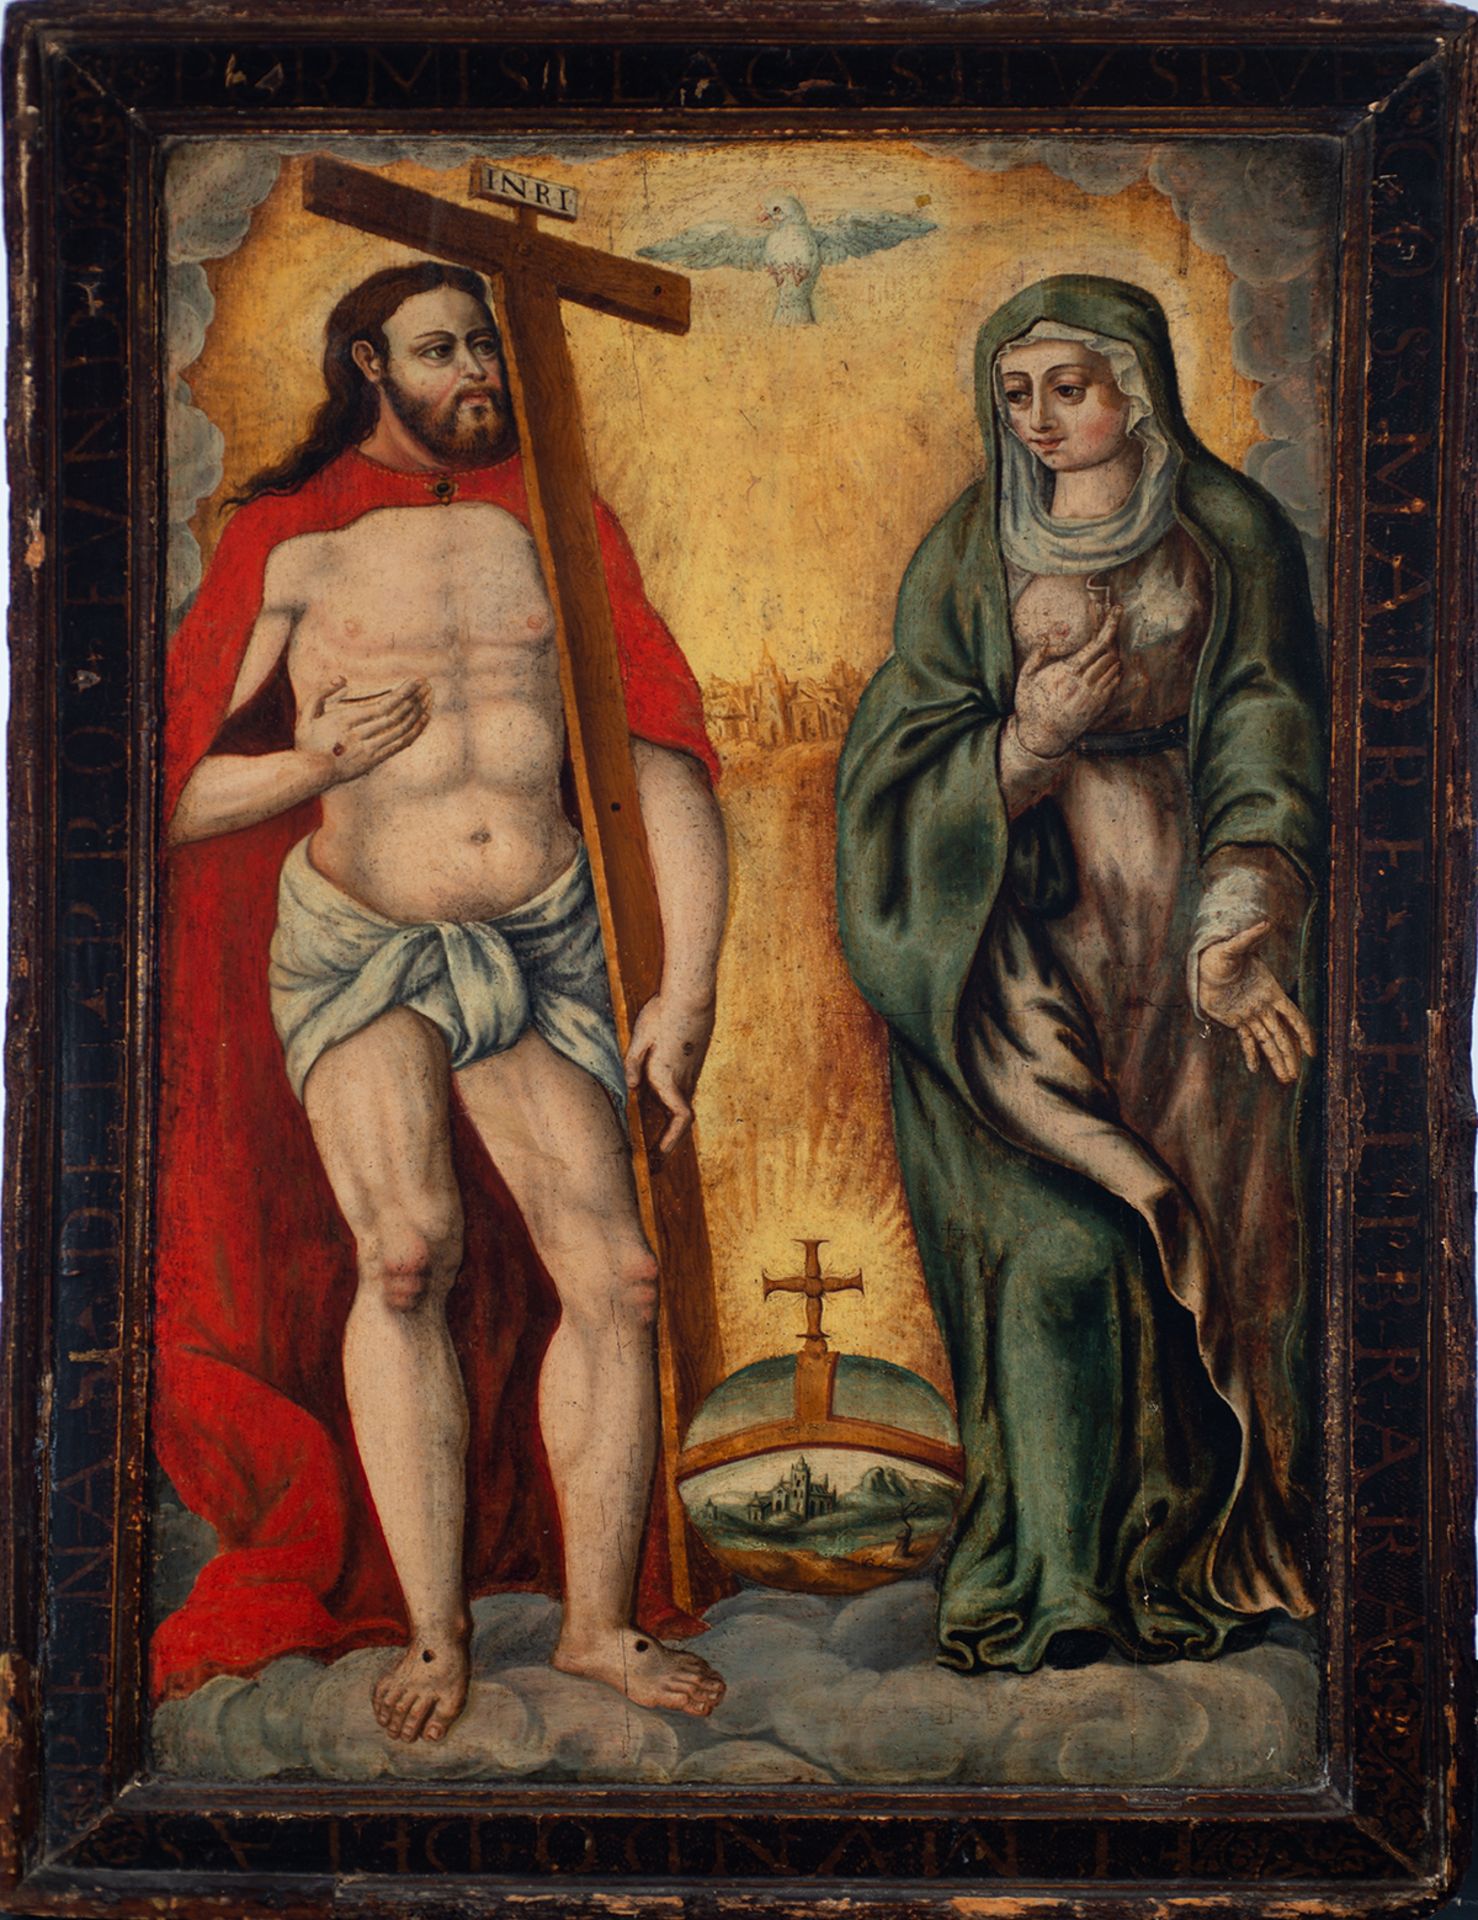 The Resurrection of Jesus in front of Mary, Toledo school from the 15th - 16th century.